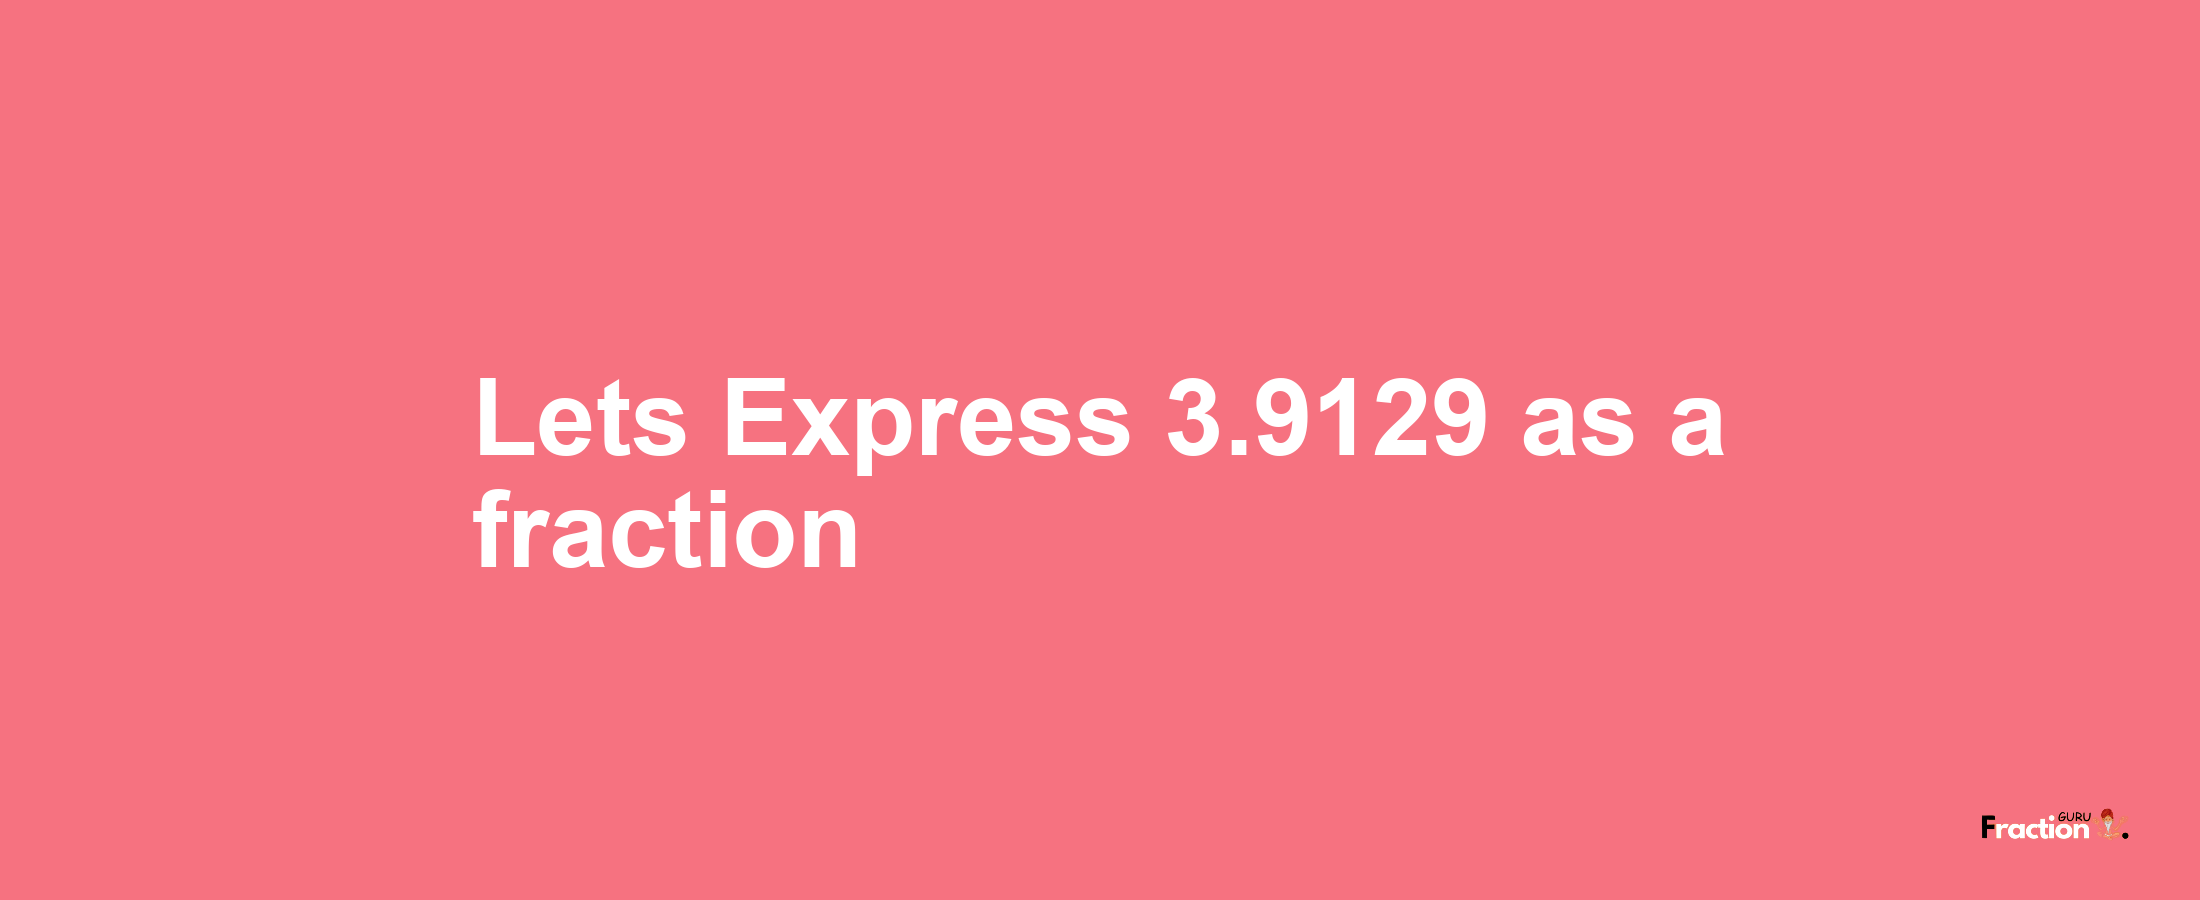 Lets Express 3.9129 as afraction